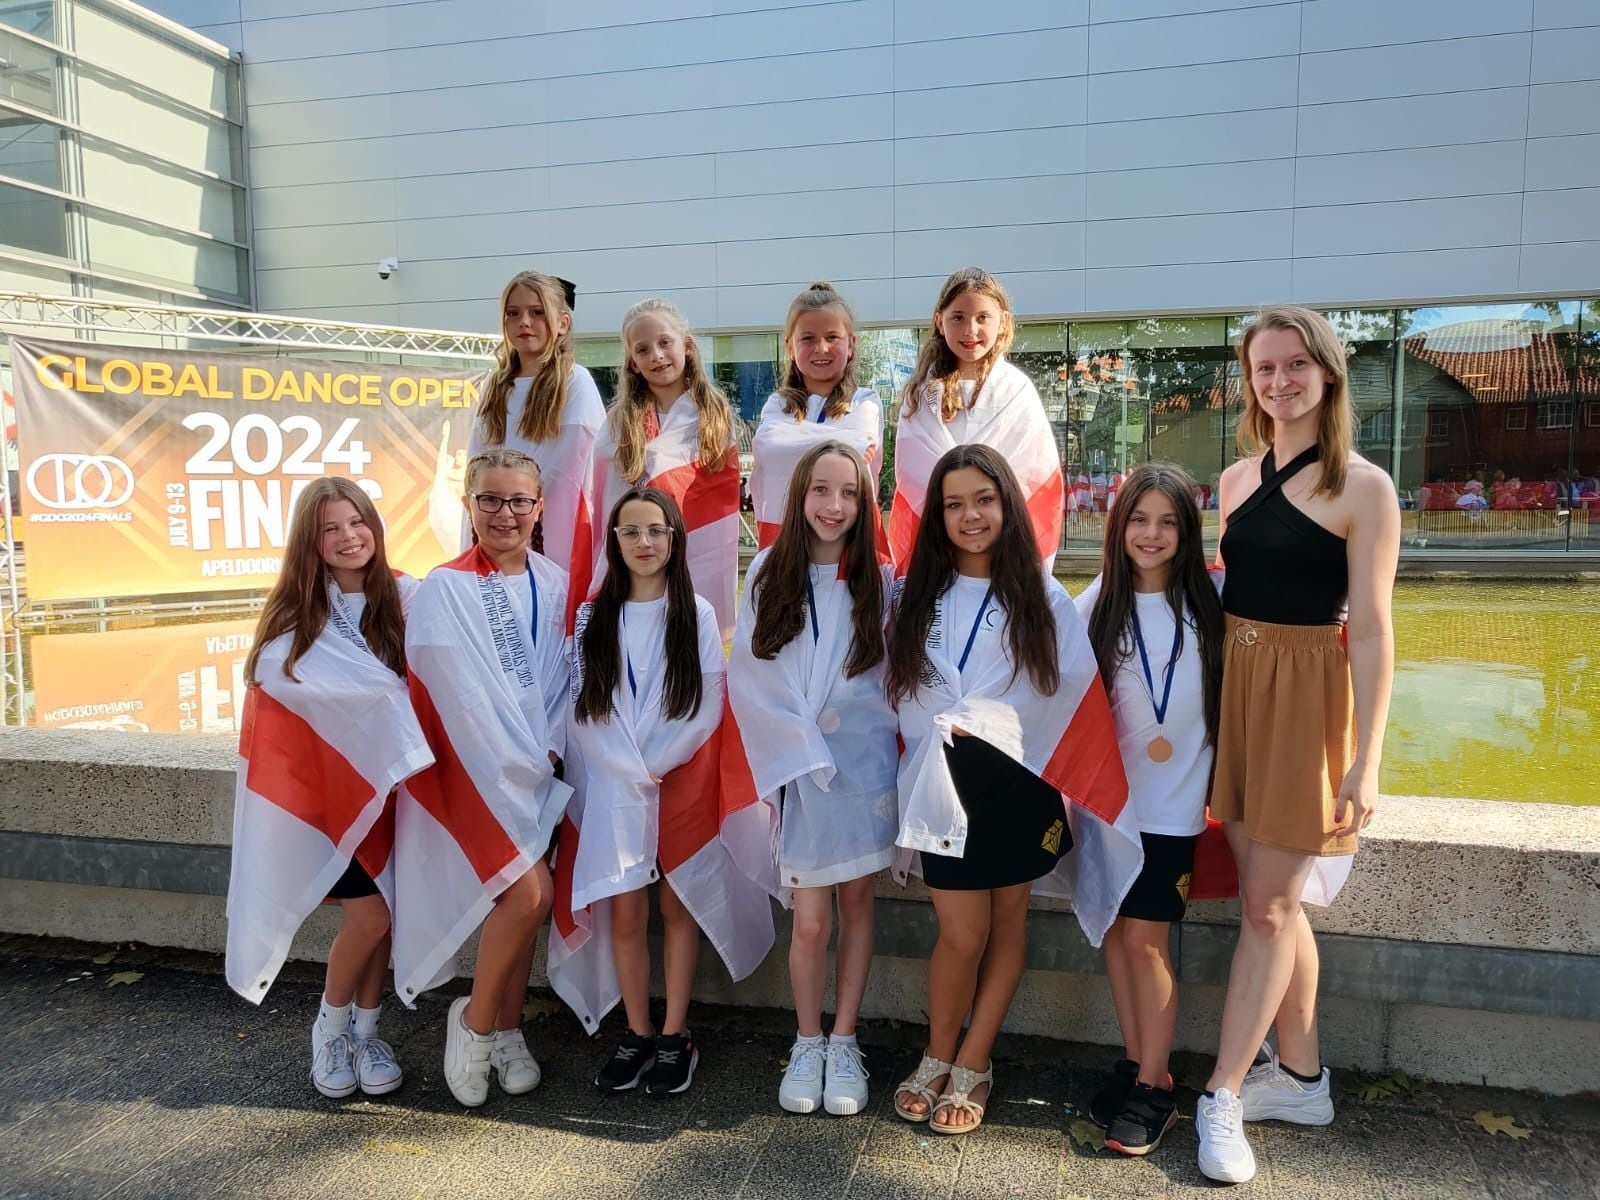 Cannock dance school achieve world standing at international competition